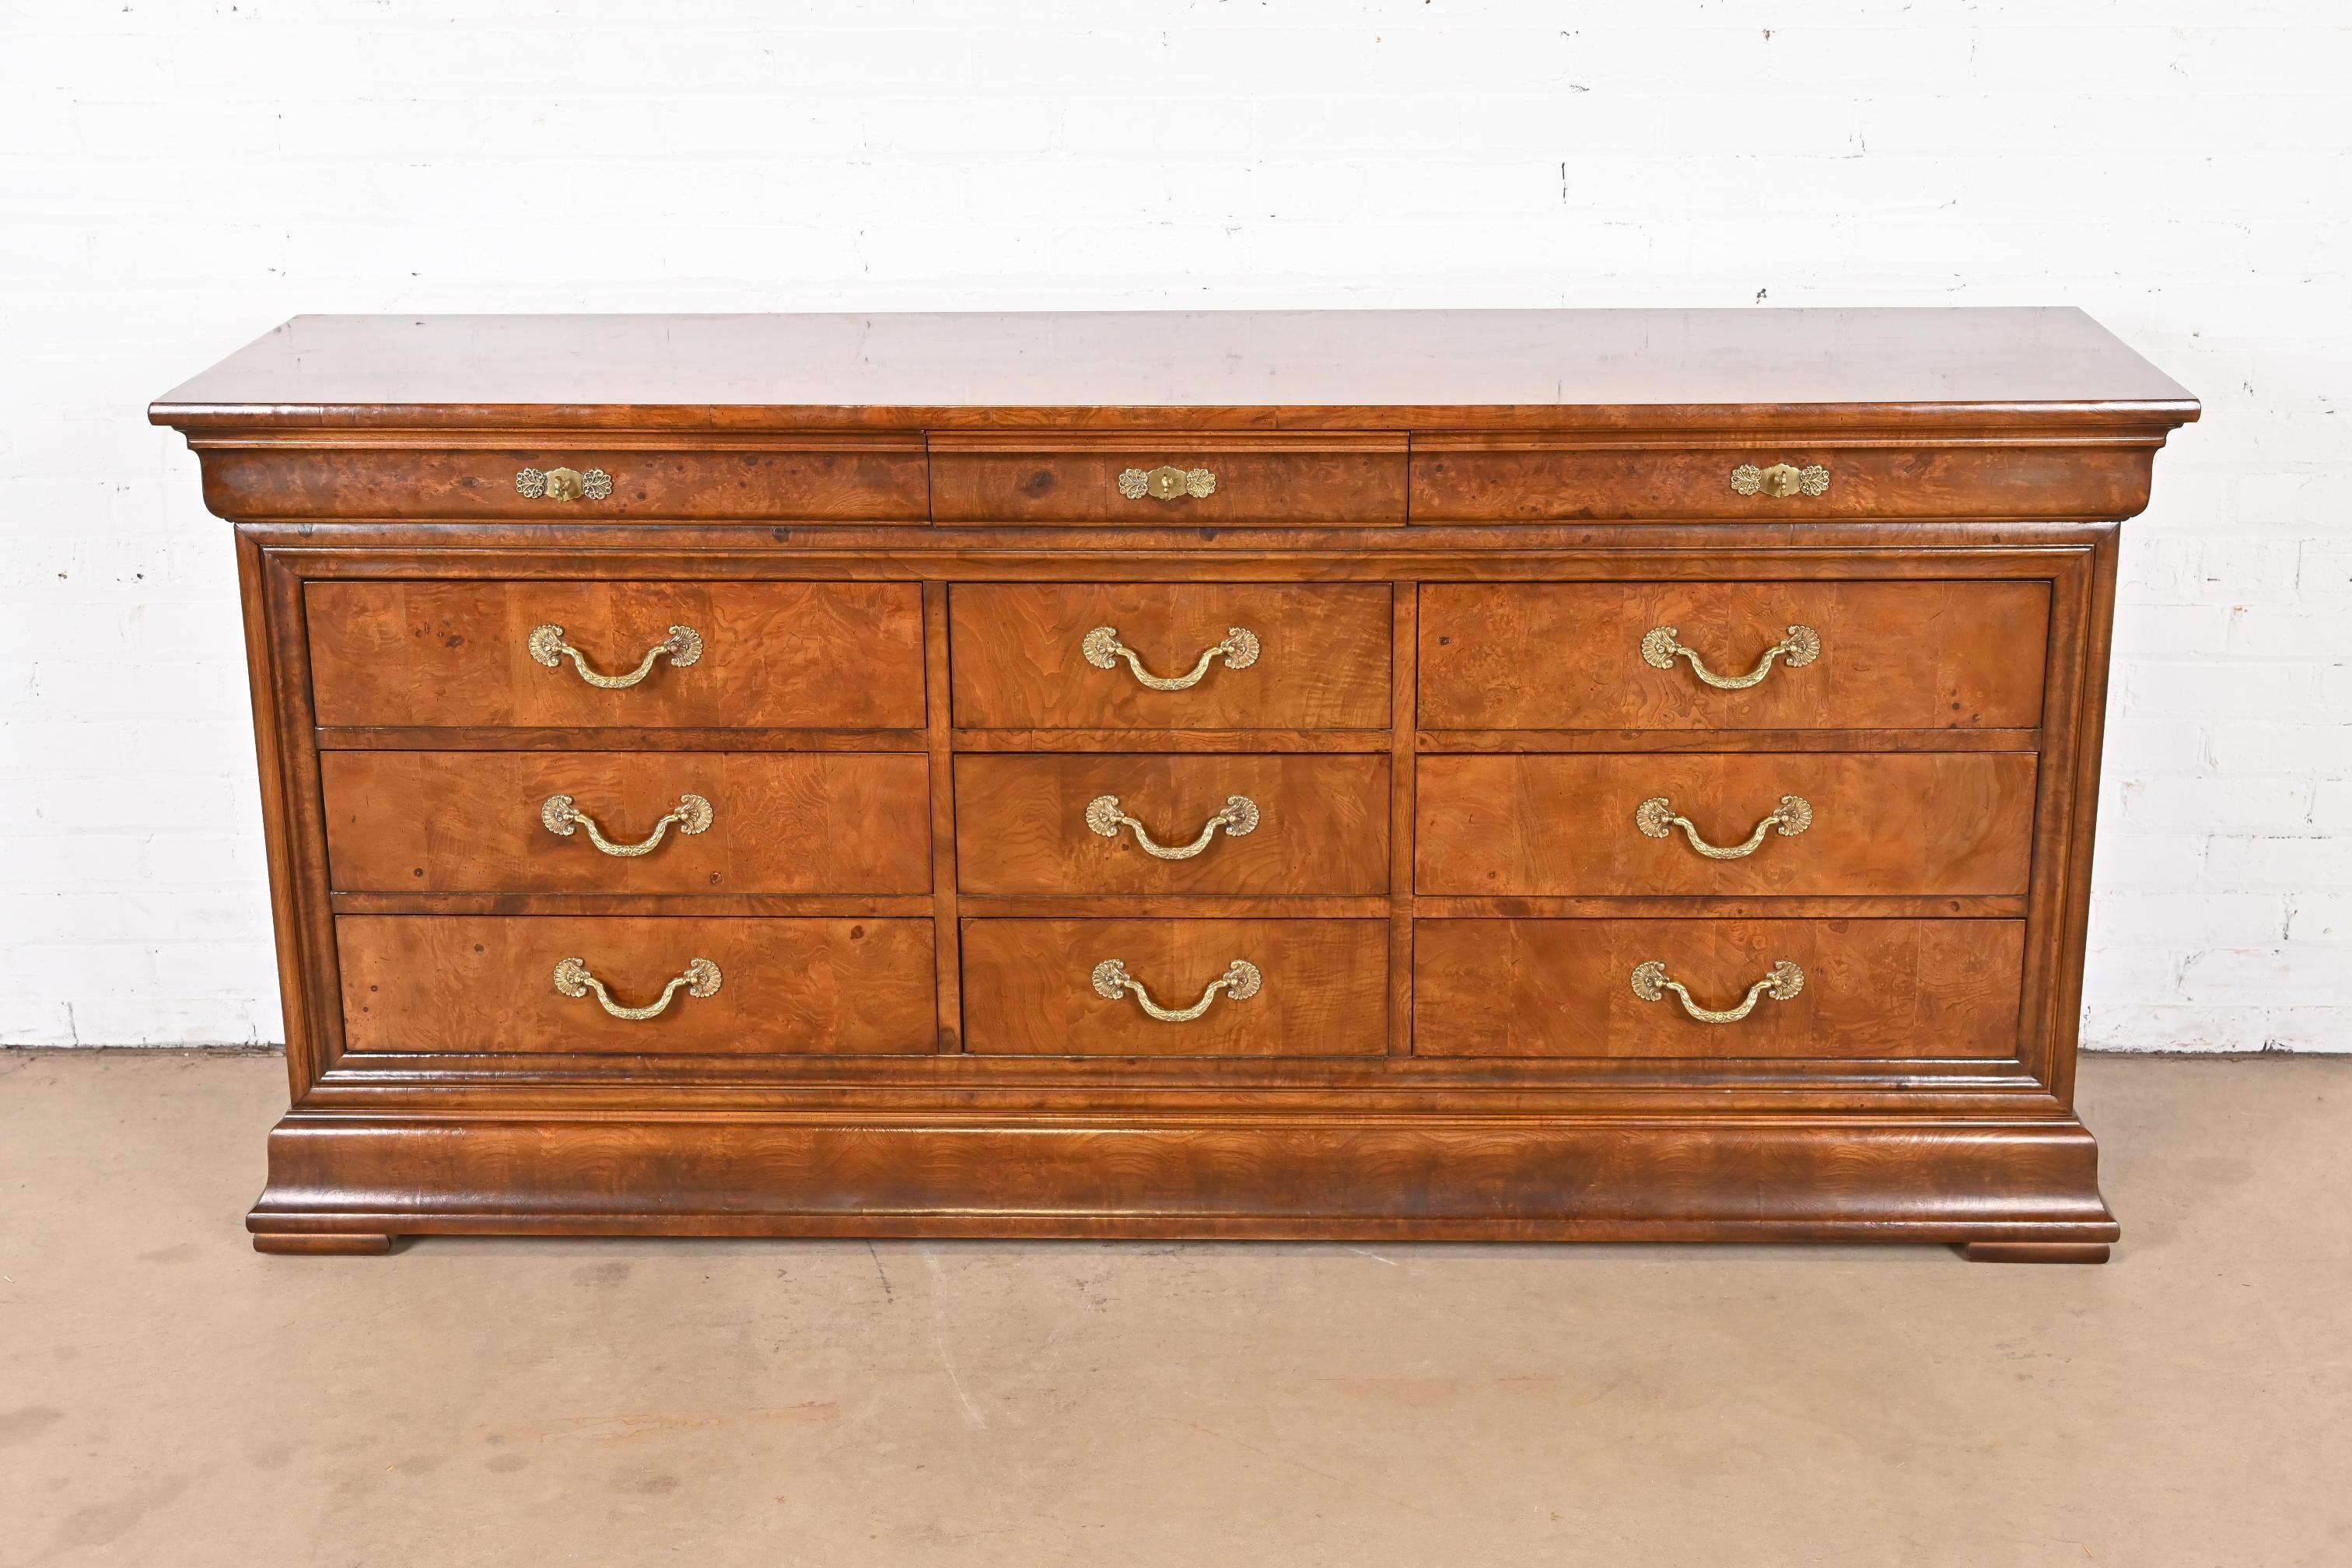 A gorgeous French Empire or Louis Philippe style twelve-drawer dresser or chest of drawers

By Henredon, 